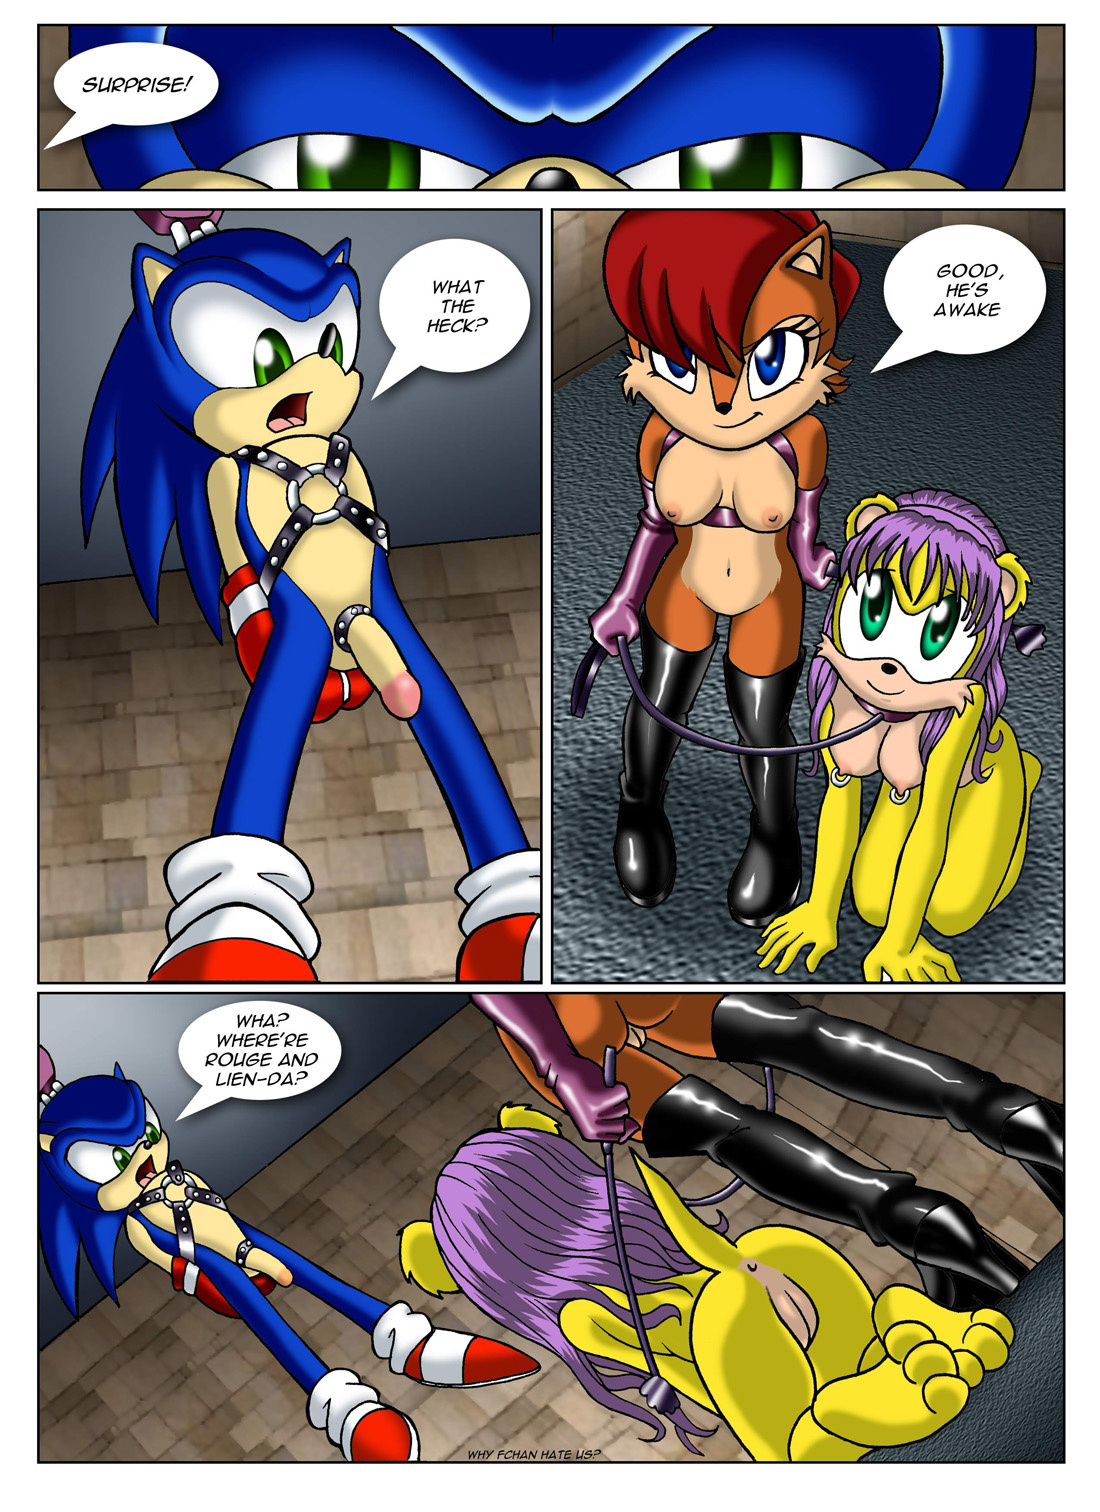 Sonic XXX Project 2 cartoon porn Oral sex, Anal Sex, BDSM, Cosplay, Double Penetration, Furry, Group Sex, Lesbians, Lolicon, Masturbation, Monster Girls, Tentacles